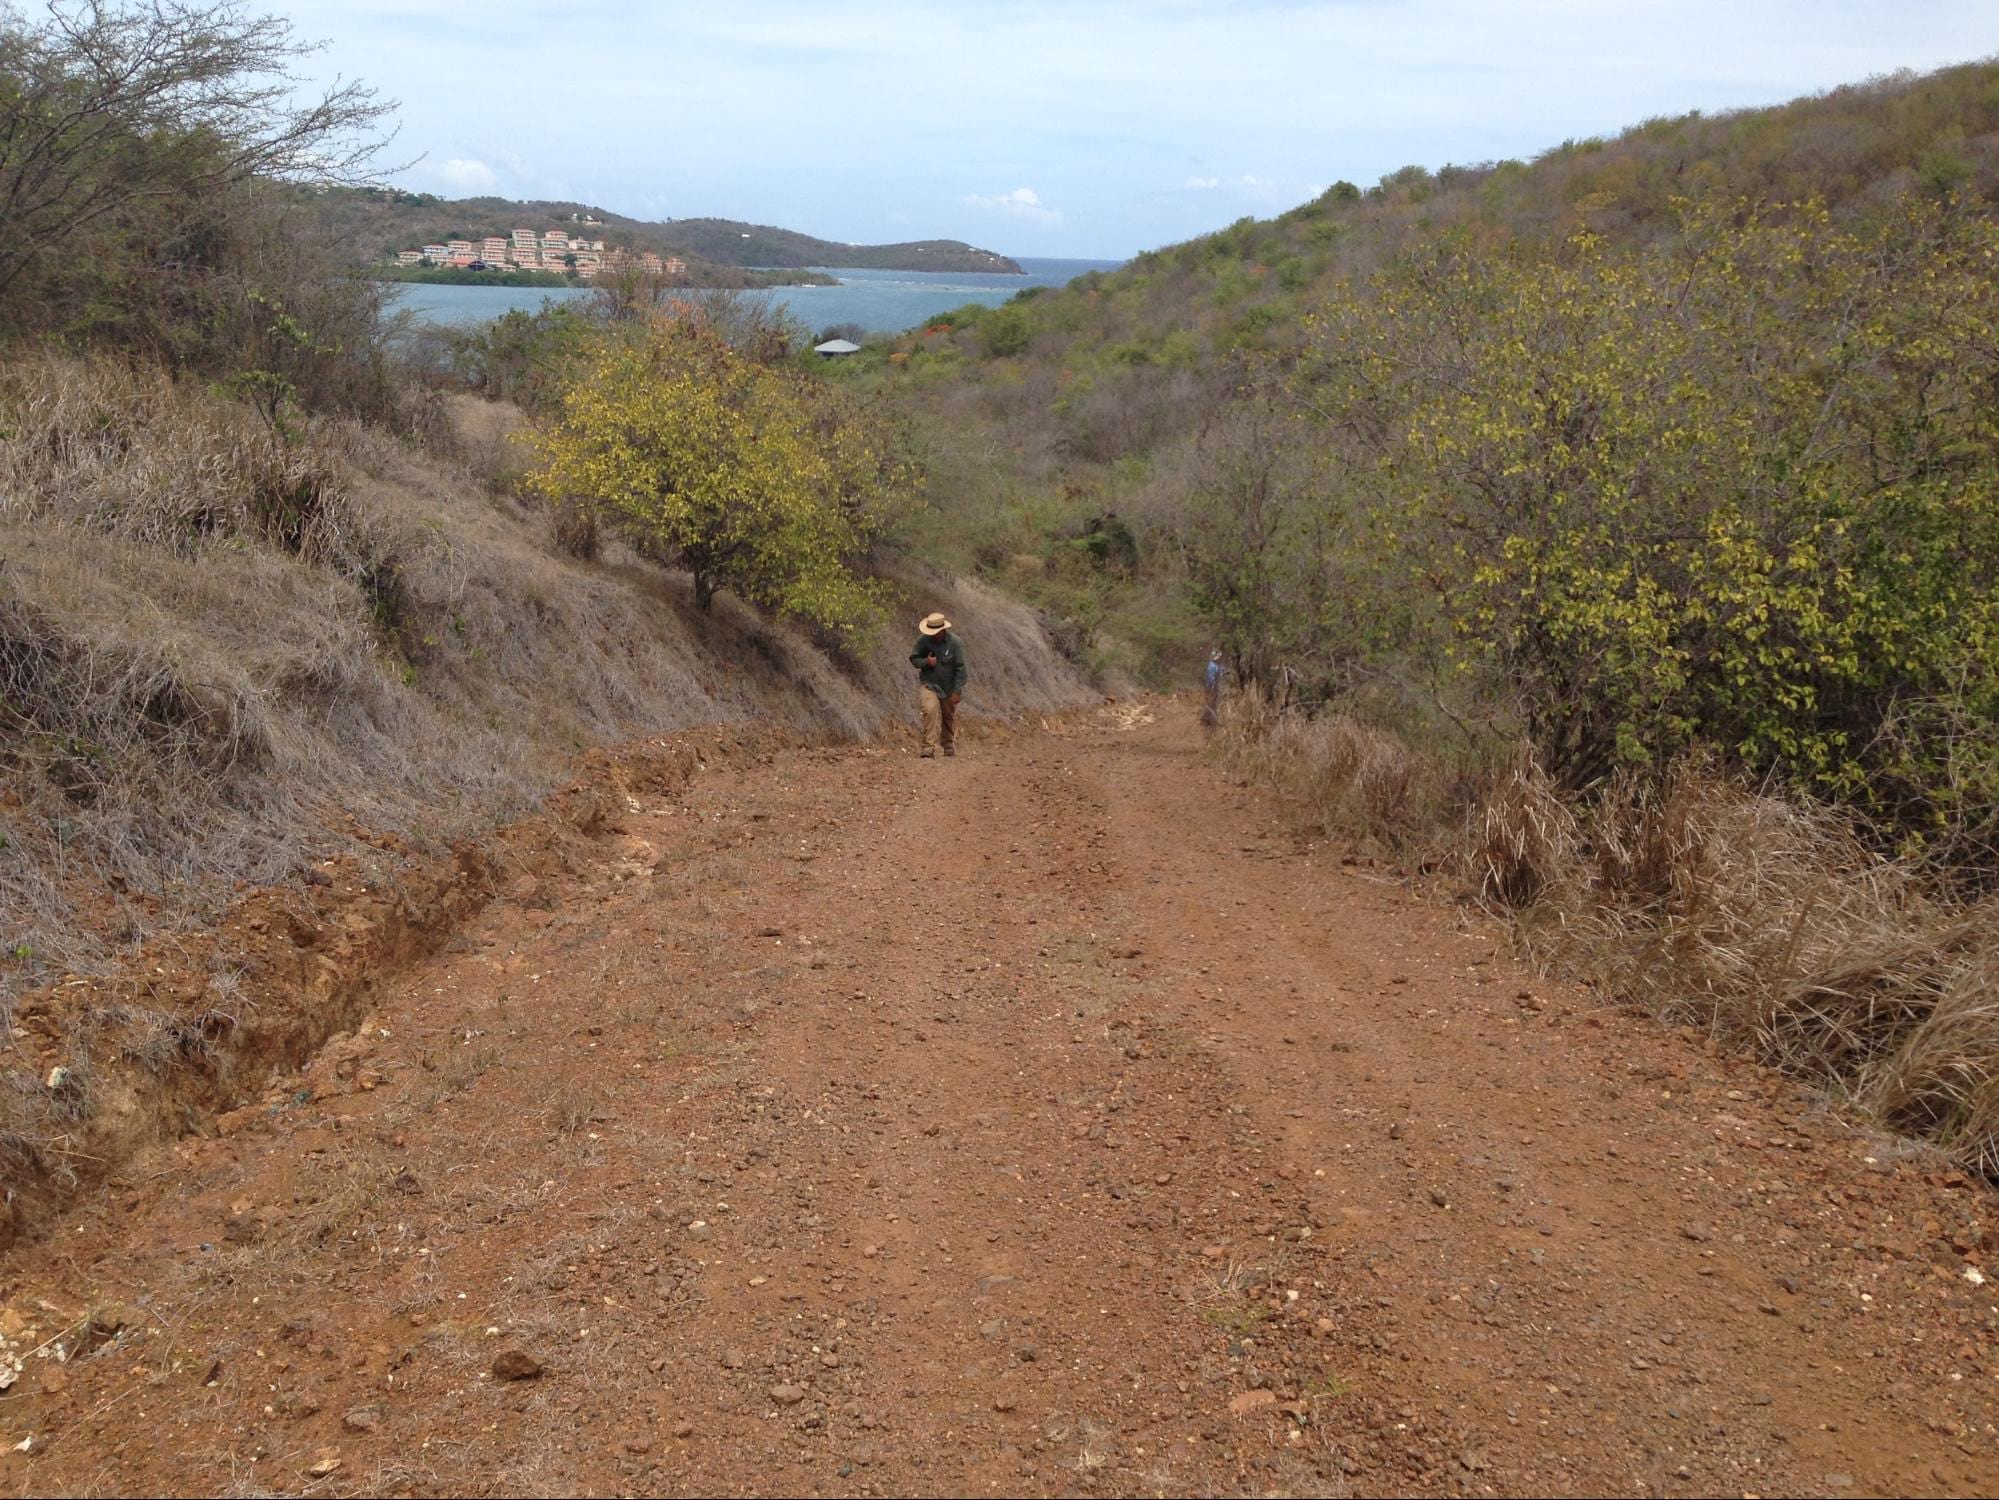 Unpaved road on the island of Culebra. Unpaved roads on the island are significant sources of sediment pollution to nearshore seagrass and coral reef habitats.